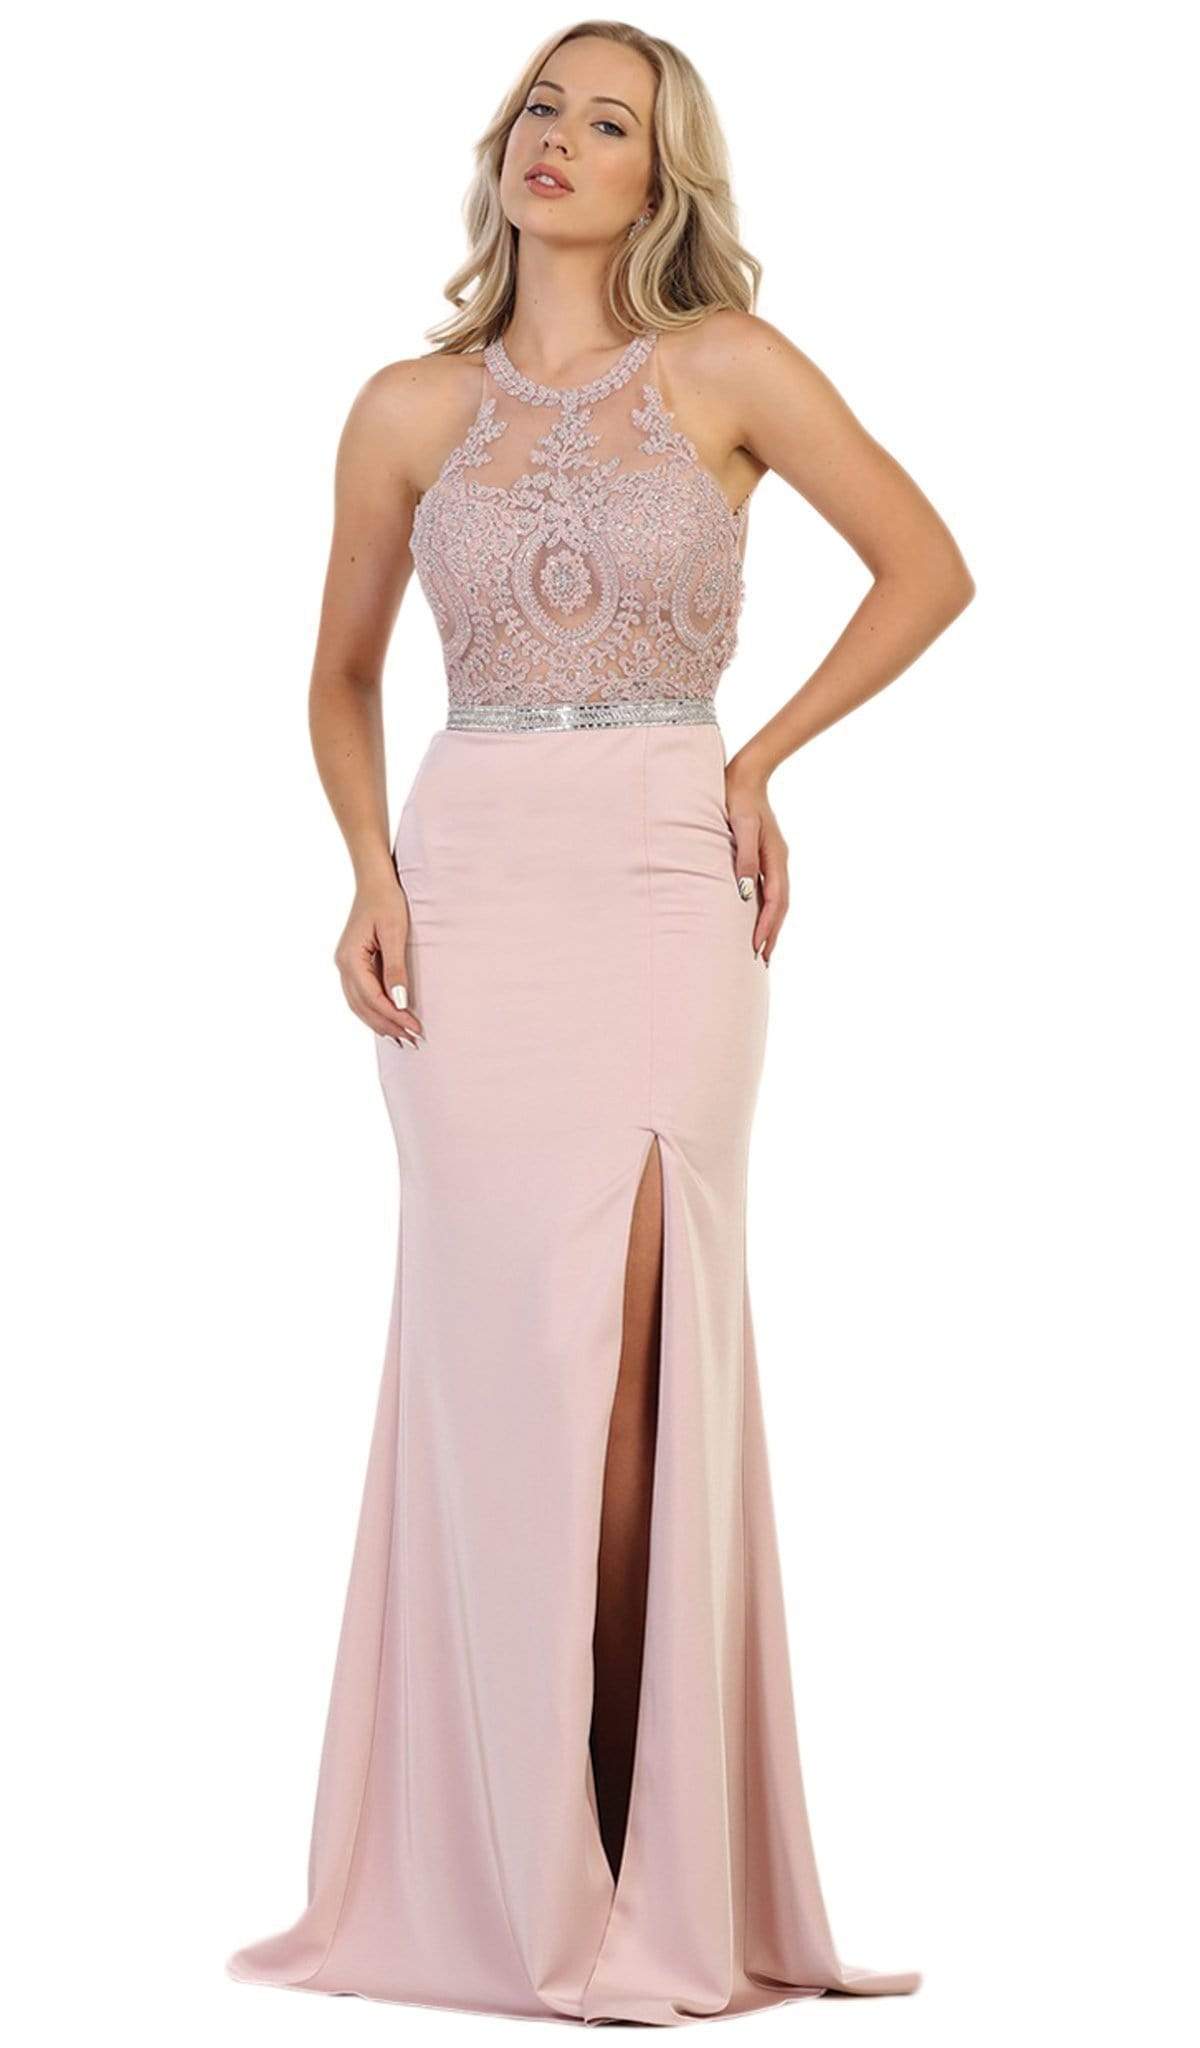 May Queen - Strappy Illusion Prom Dress with Slit Special Occasion Dress 2 / Blush